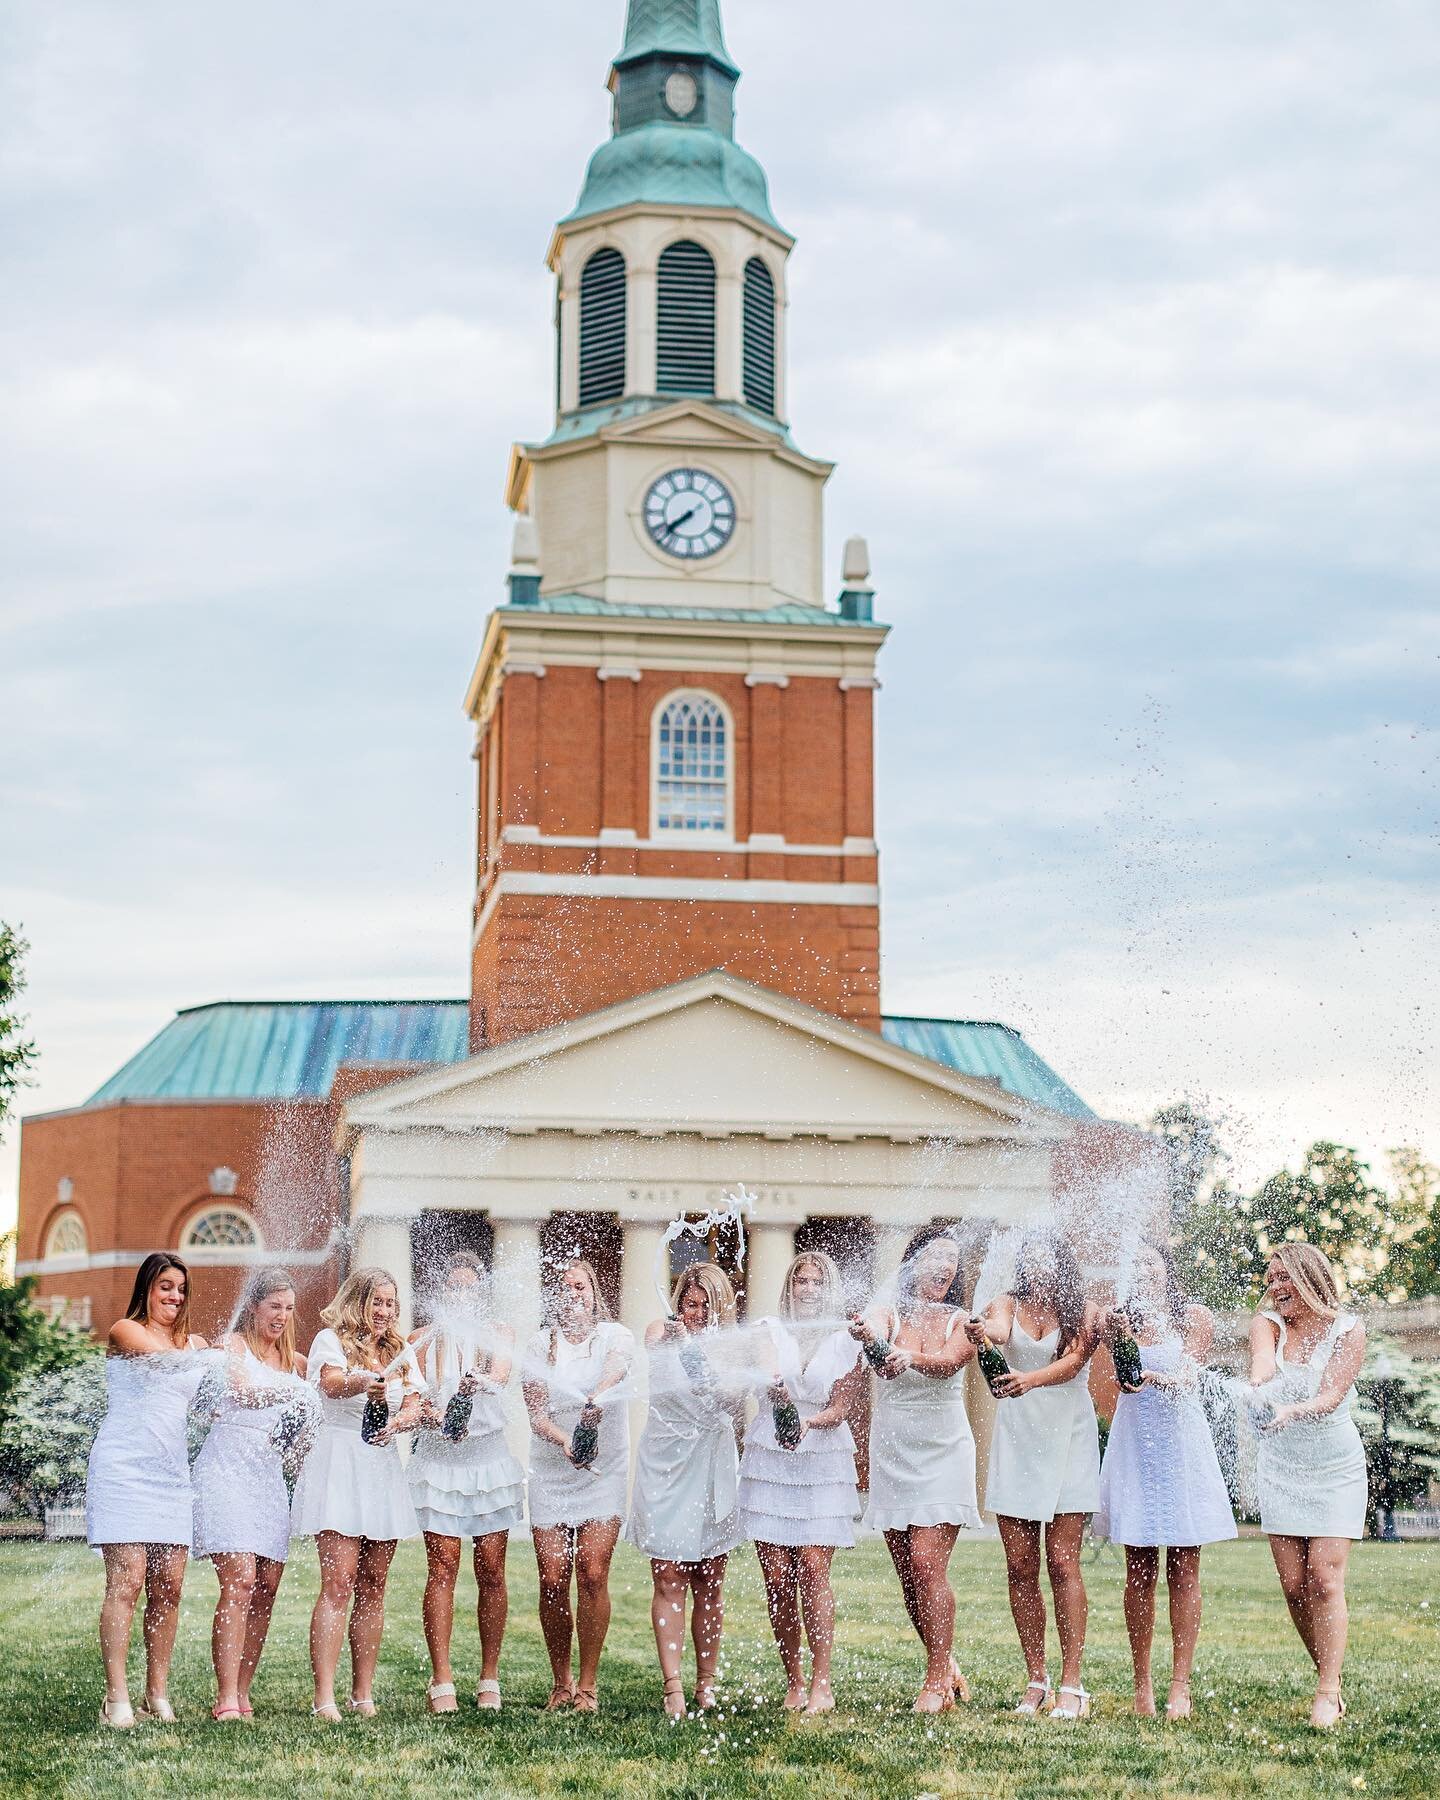 All of the posts from @wfuniversity returning for the new school year has gotten me nostalgic for my four years, especially senior spring! I was able to photograph so many seniors this year and it was so fun to enjoy so many late-spring evenings with